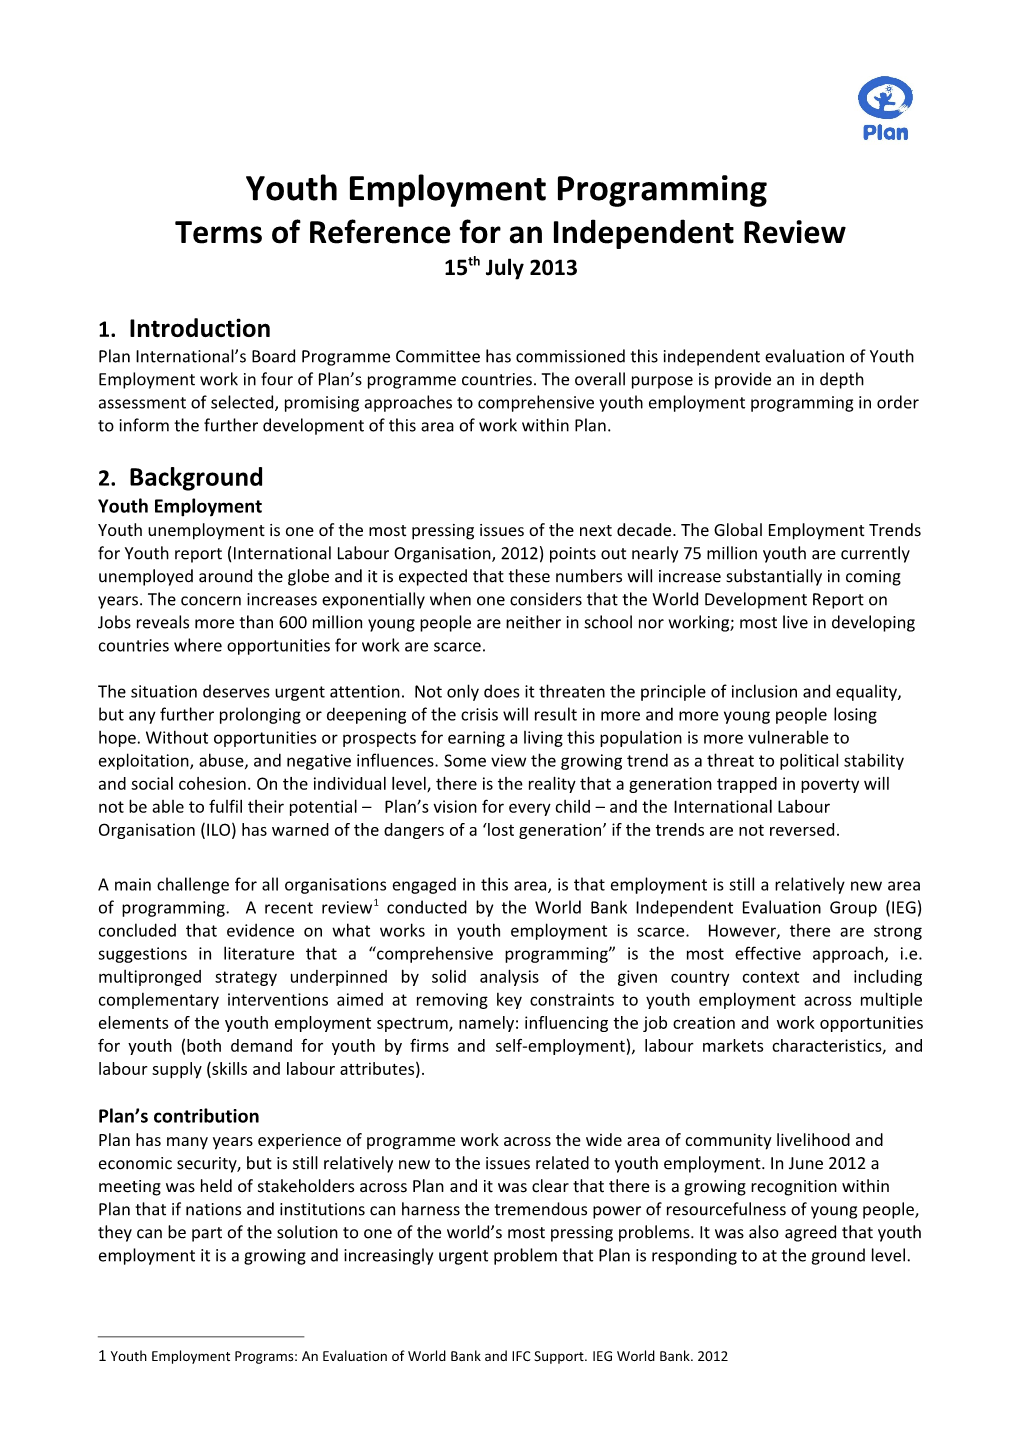 Terms of Reference for an Independent Review